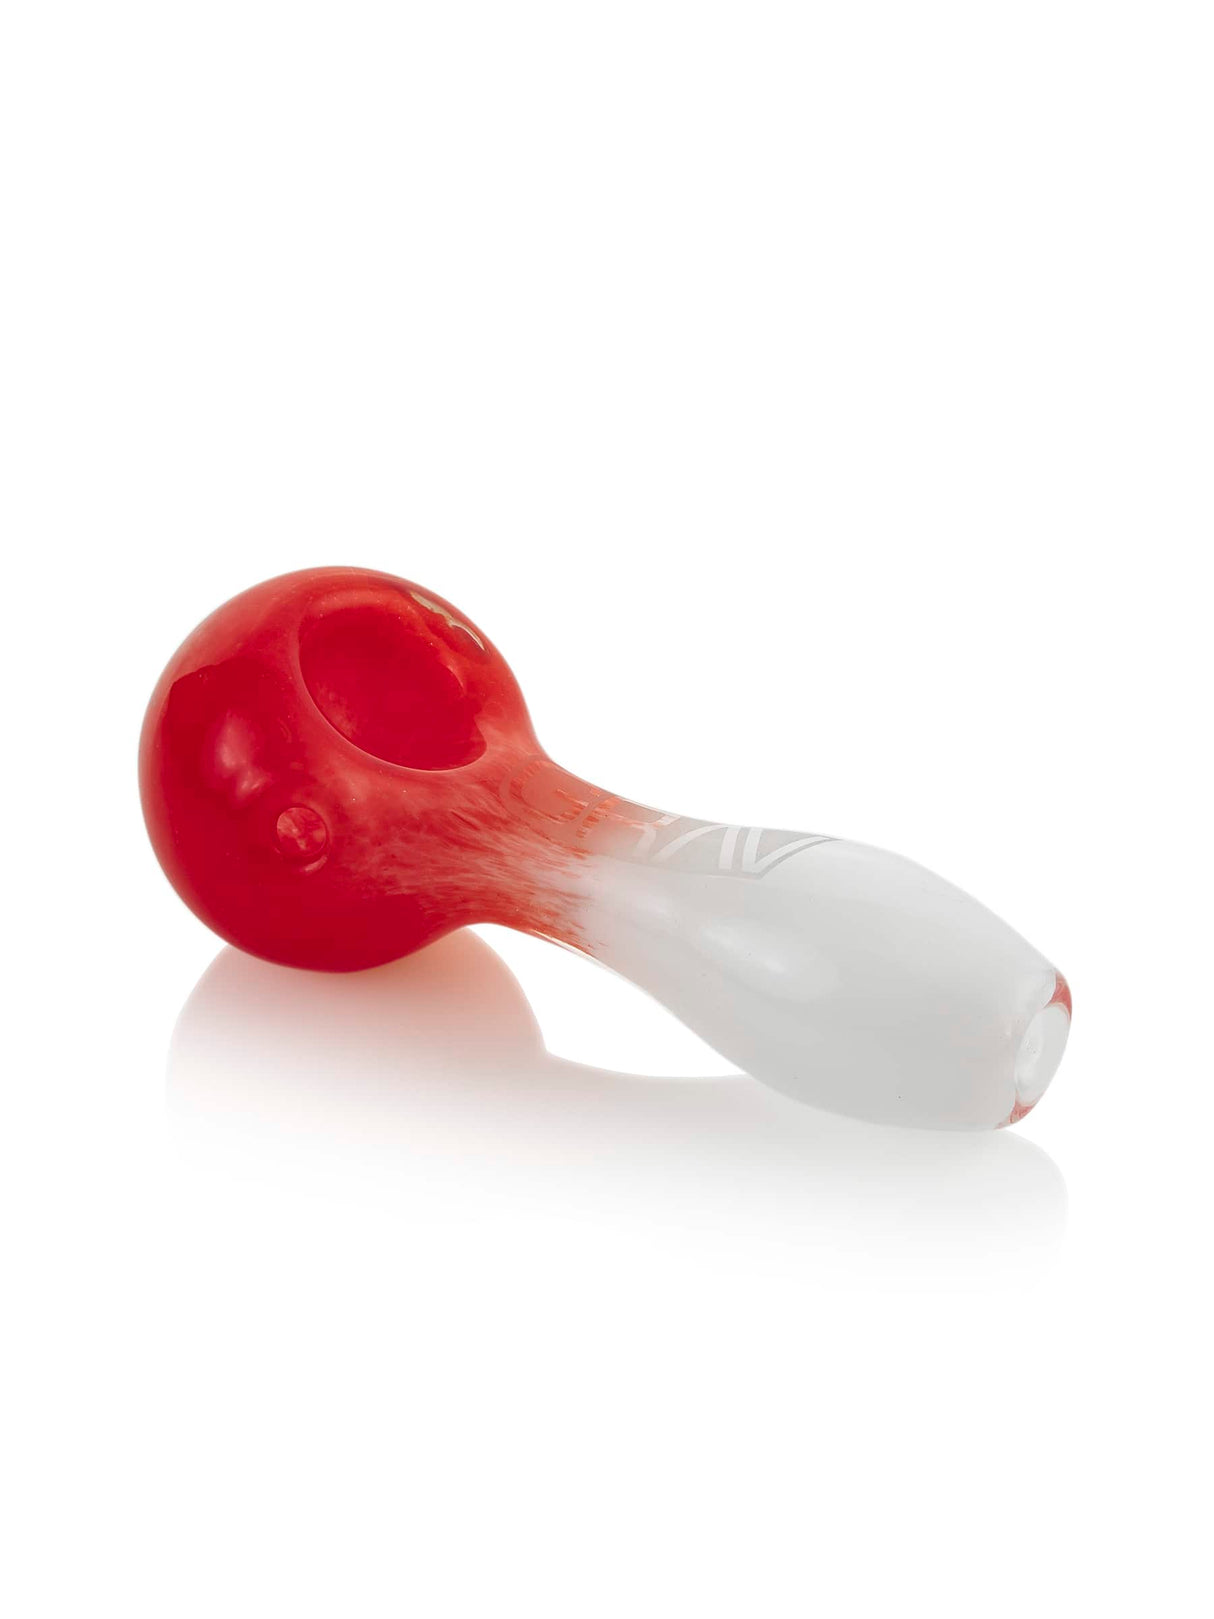 GRAV Frit Spoon Hand Pipe in Cherry Red, 4" Compact Borosilicate Glass, Side View